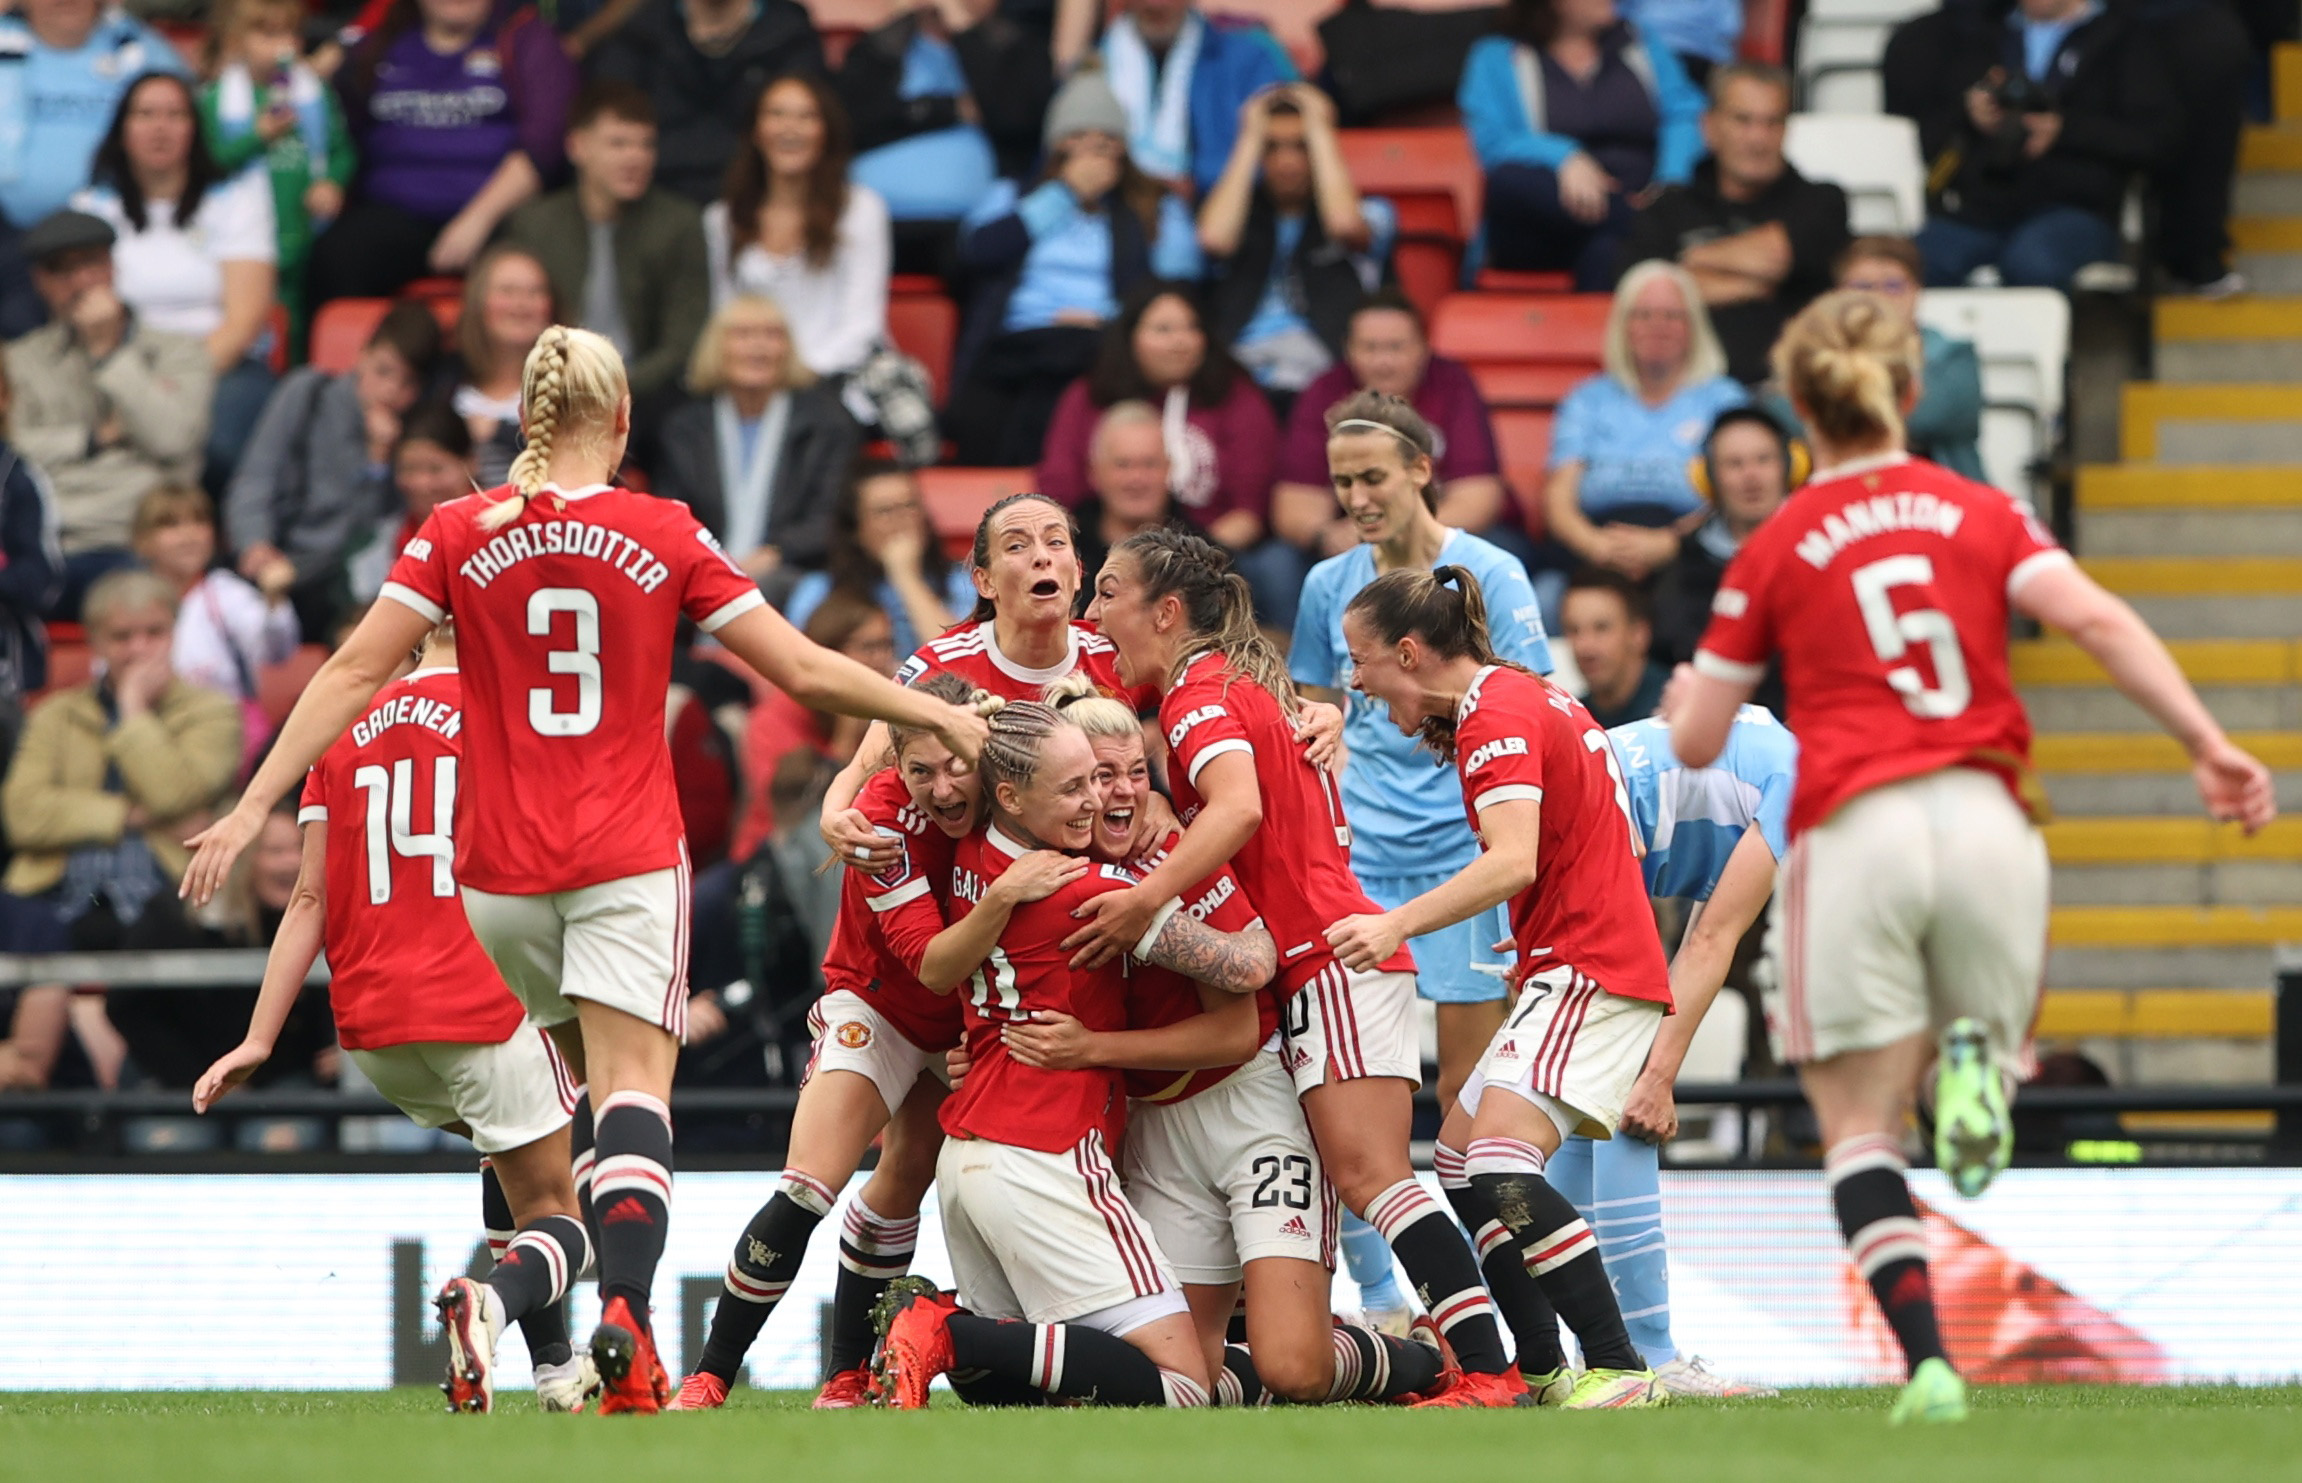 Manchester United held to 2-2 draw by Manchester City in WSL derby